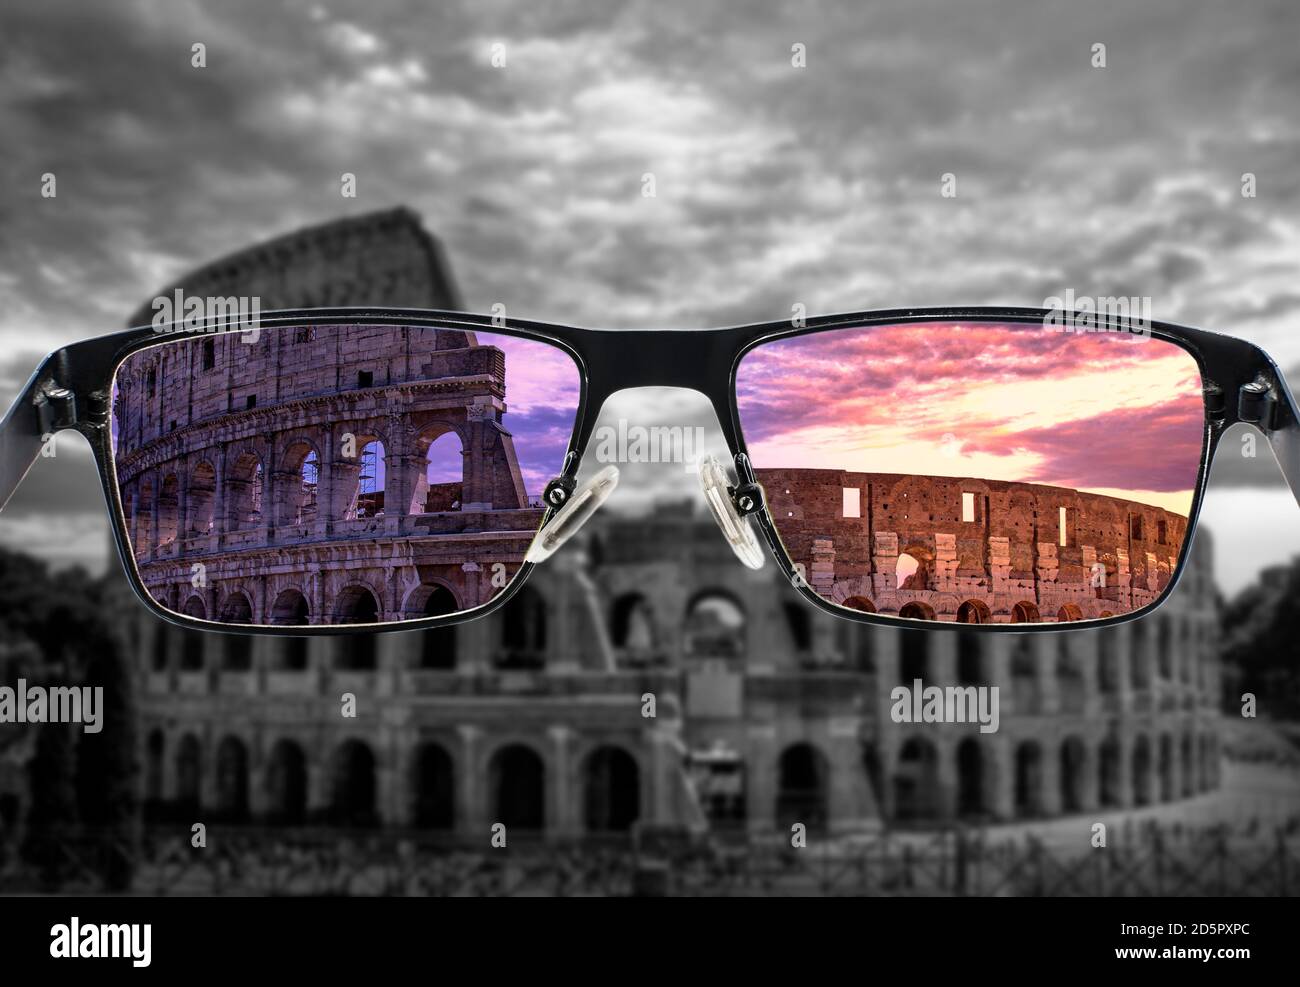 Looking through glasses to colorful Colosseum (Coliseum) in Rome at sunset against purple cloudy sky, Italy. Different world perception. Optimism. Stock Photo